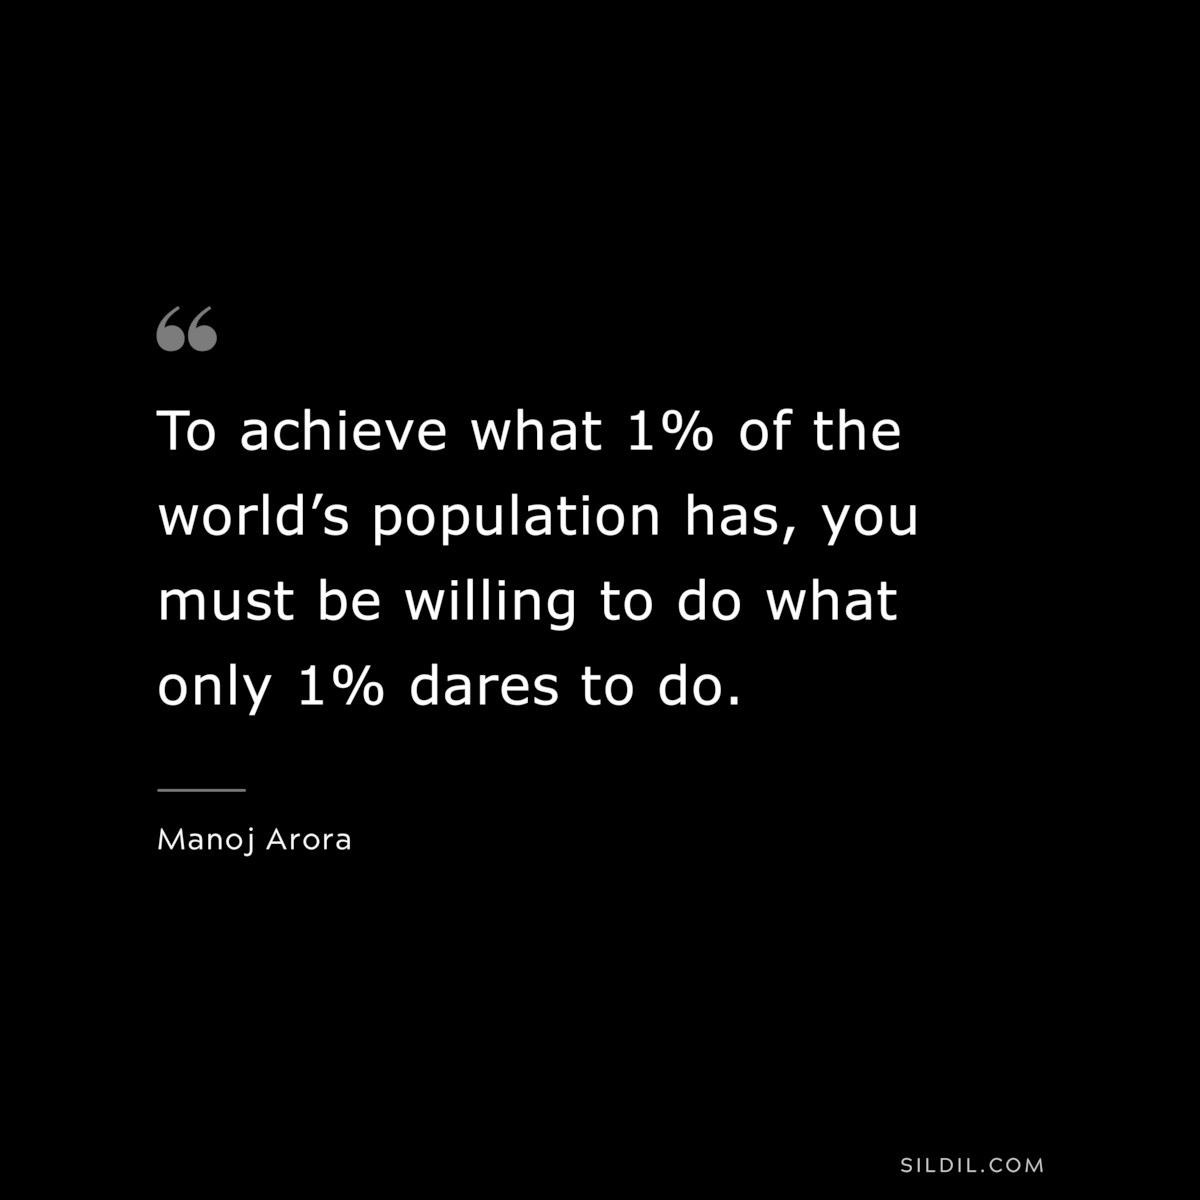 To achieve what 1% of the world’s population has, you must be willing to do what only 1% dares to do. ― Manoj Arora